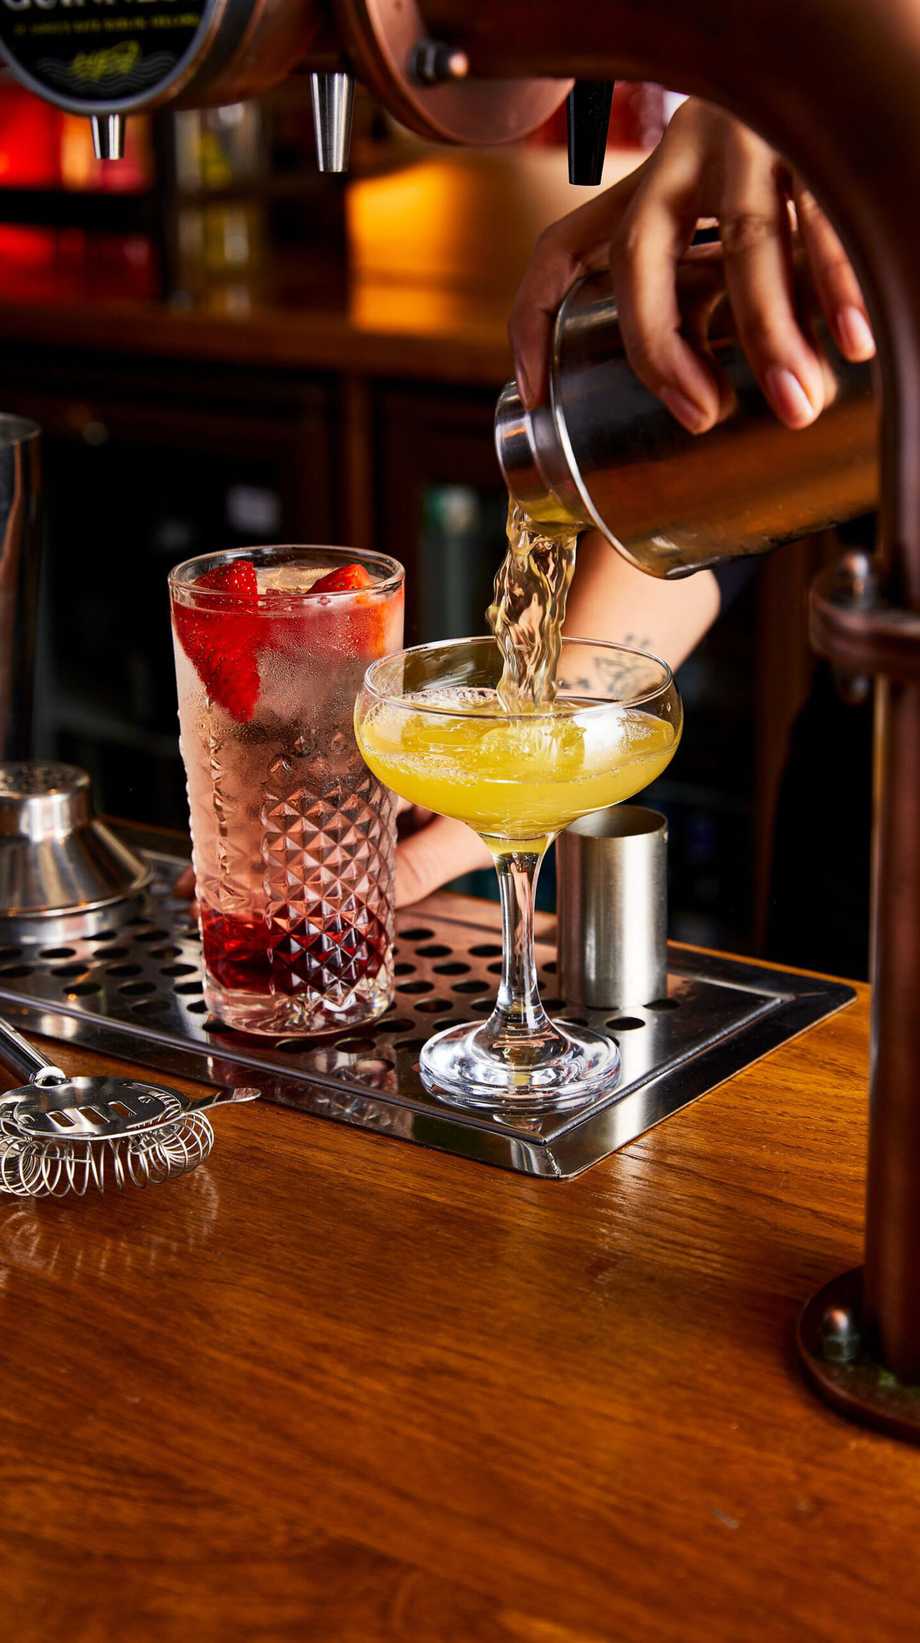 A team member is pouring a cocktail from a mixer into a glass. Next to it, a cocktail with a fruit garnish has been created.